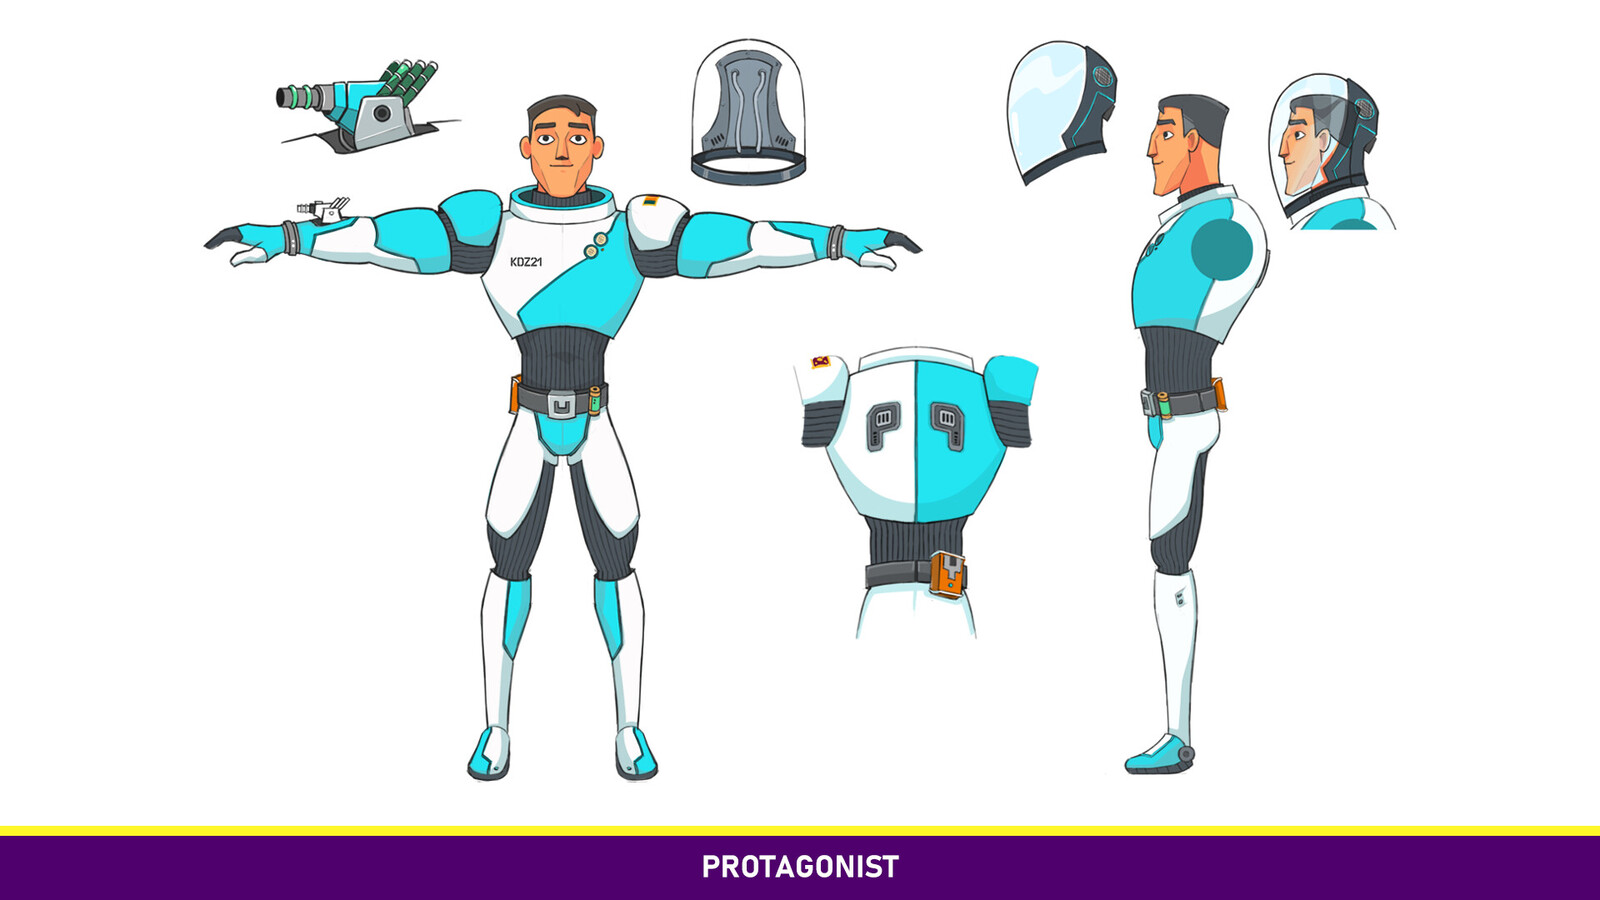 Here is our character design for the main player character called " The Protagonist "

